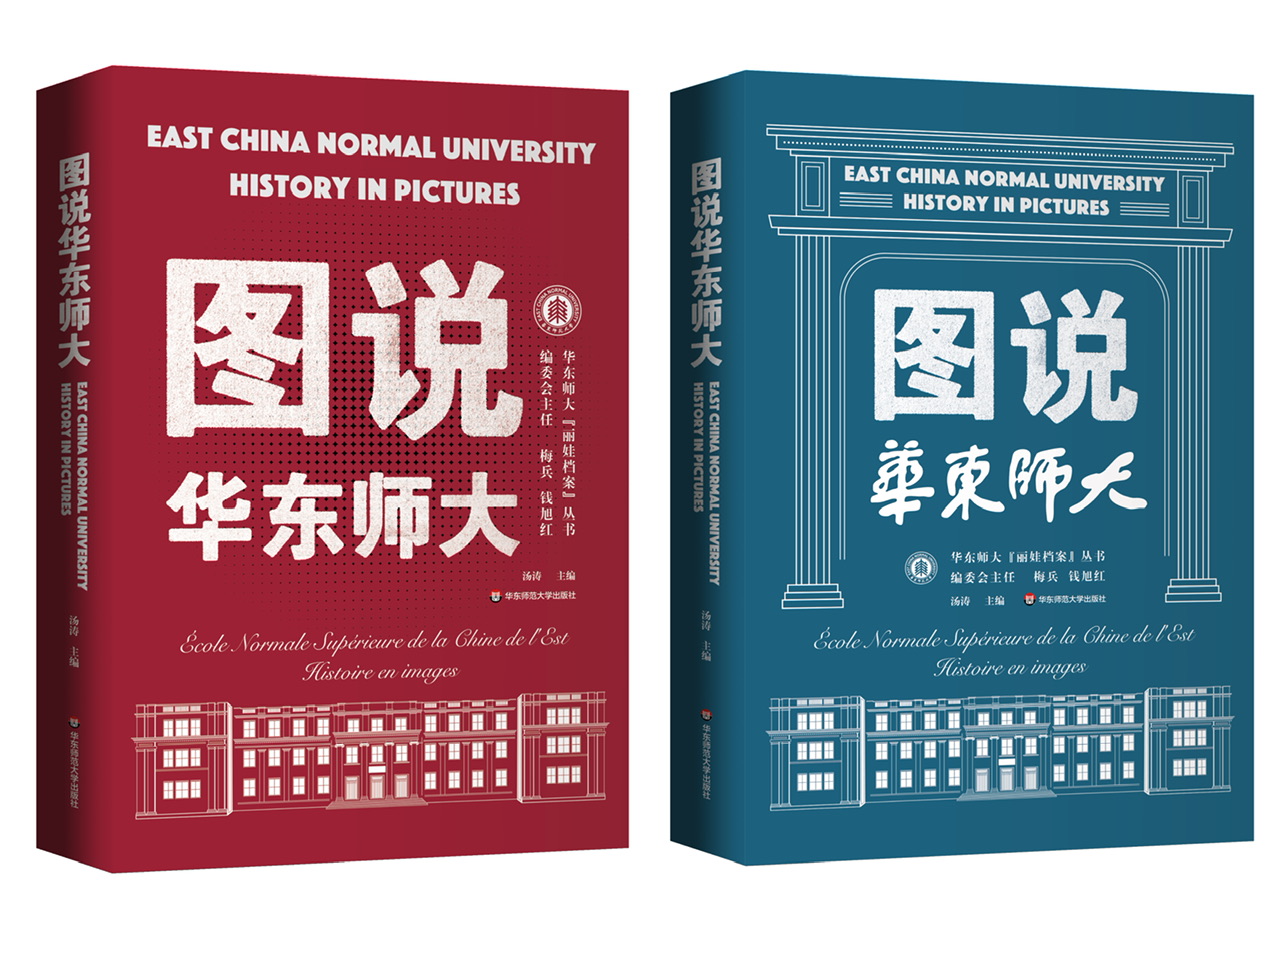 National first-class universities discuss and disseminate the beauty of school history and culture, with images of the college entrance examination season | universities | culture